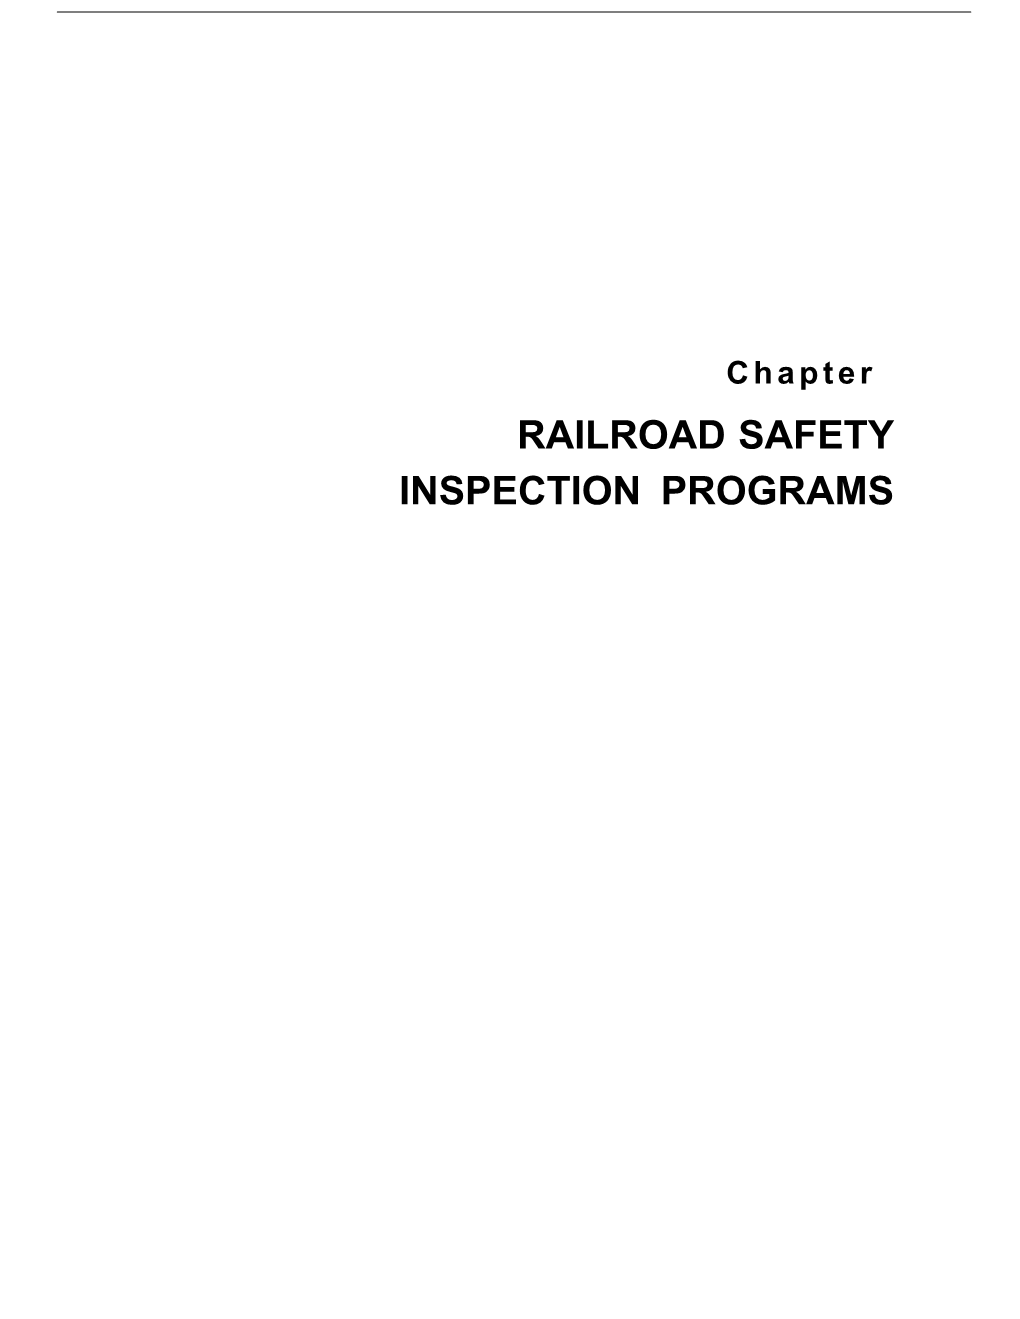 Chapter Vlll RAILROAD SAFETY INSPECTION PROGRAMS